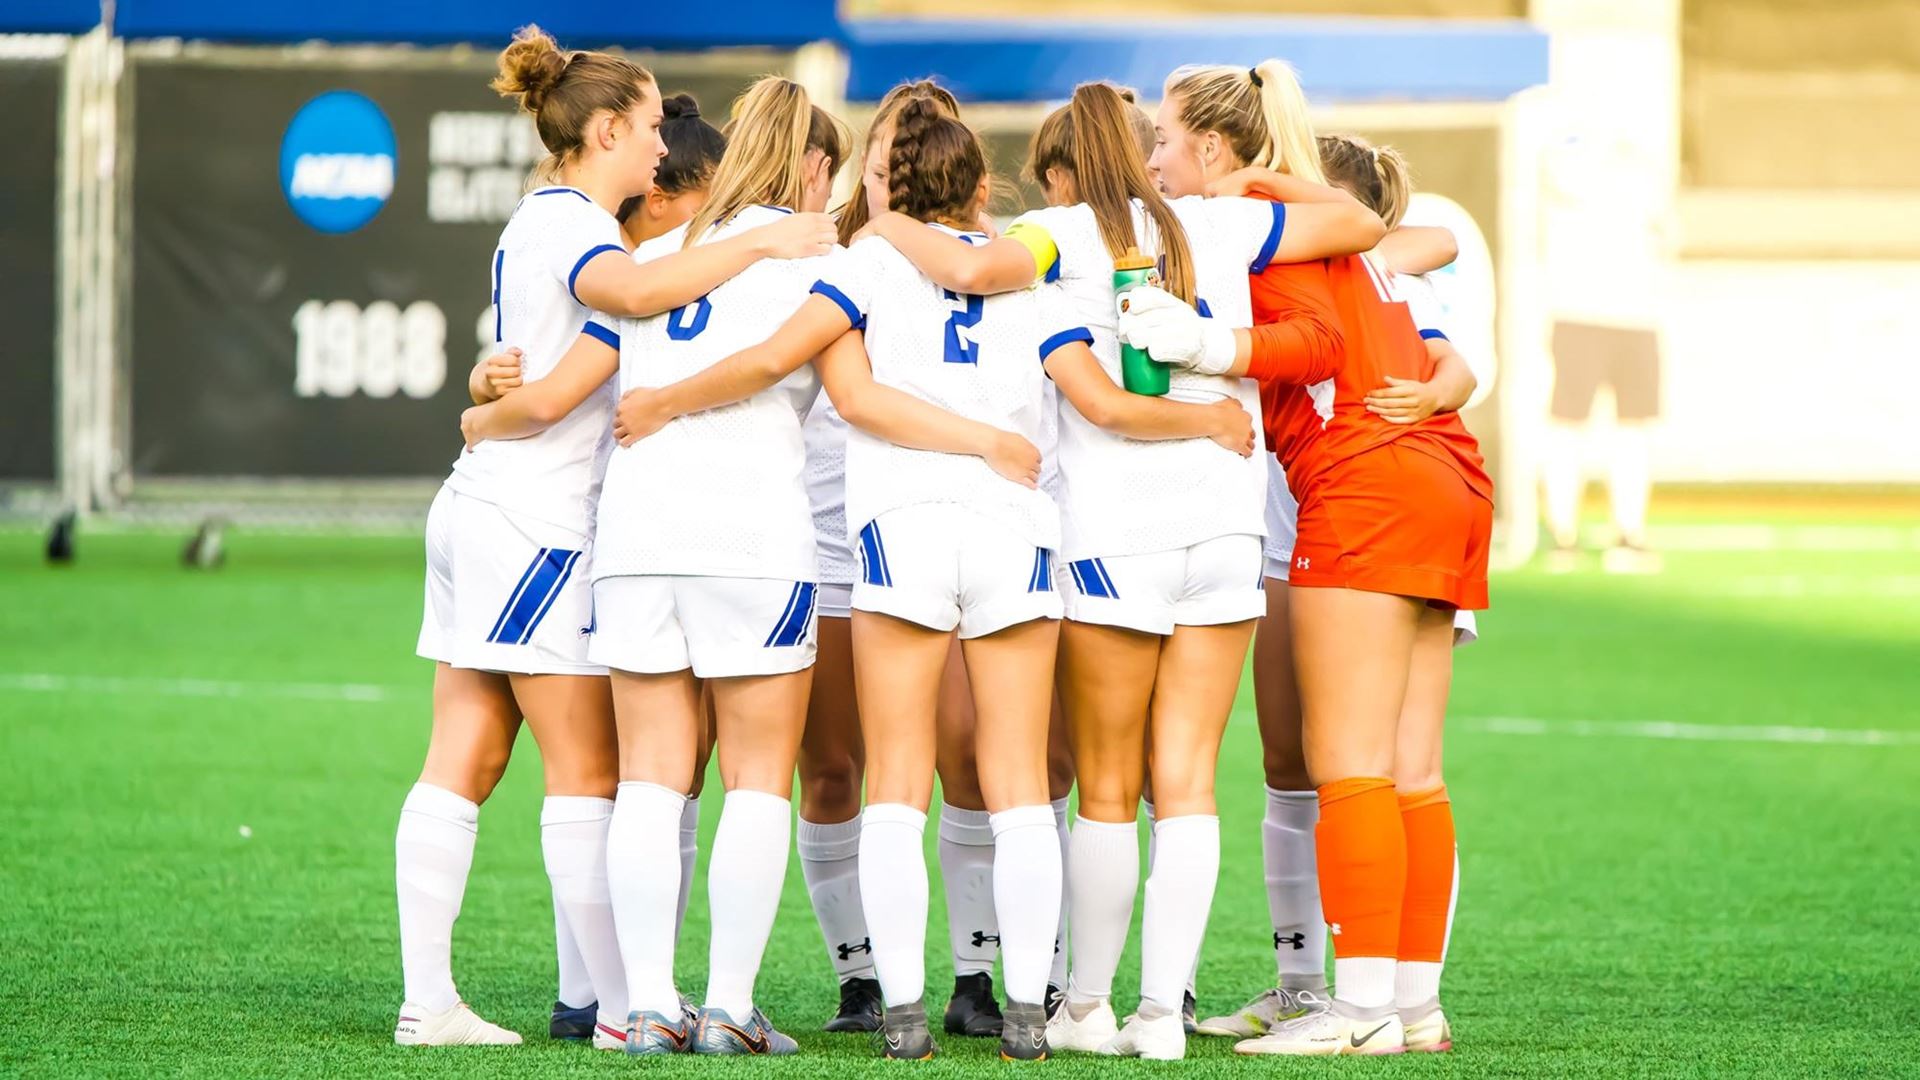 The Seton Hall women's soccer team huddles before a game.